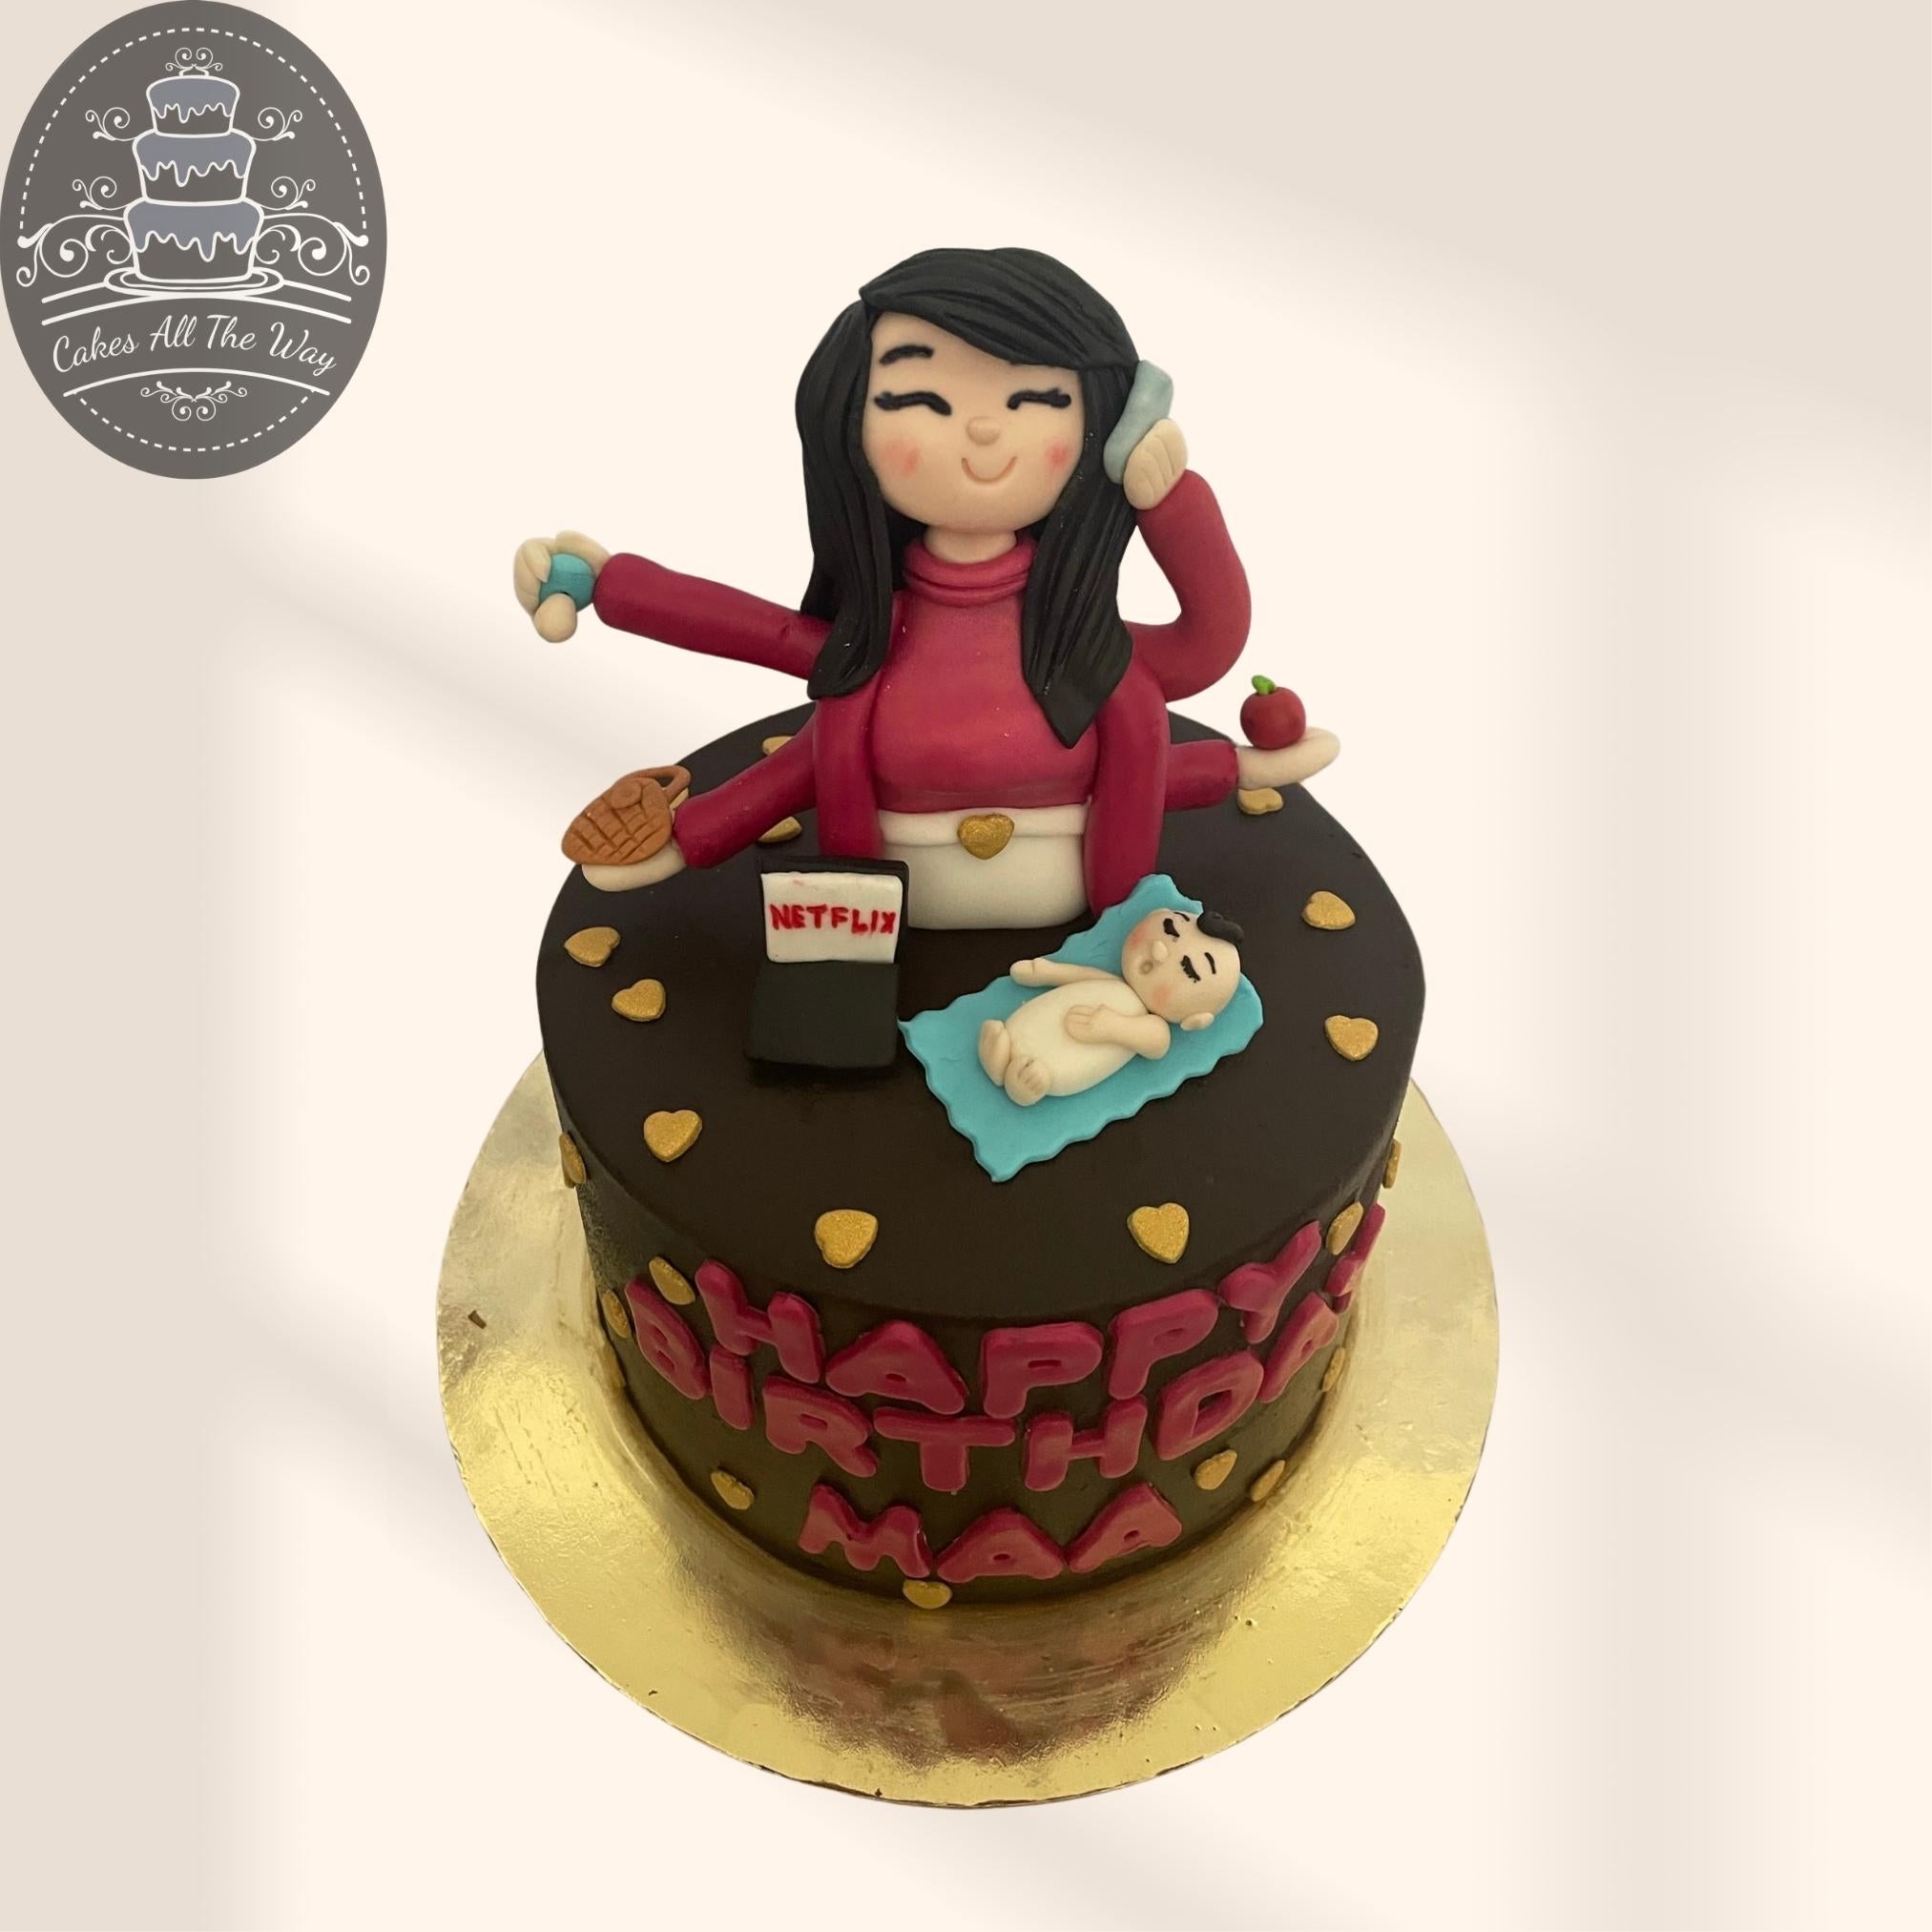 Reema's Swad Cooking Classes - Themed cake of all the things the birthday  boy loves..😊😊 #netflix #amazonprime #bike #panipuri #movies #Anniversay  #Birthday #Cake #Baking #Frosting #Celebration #Party #Vegetarian #Eggless  #Workshop #Making #Reema #